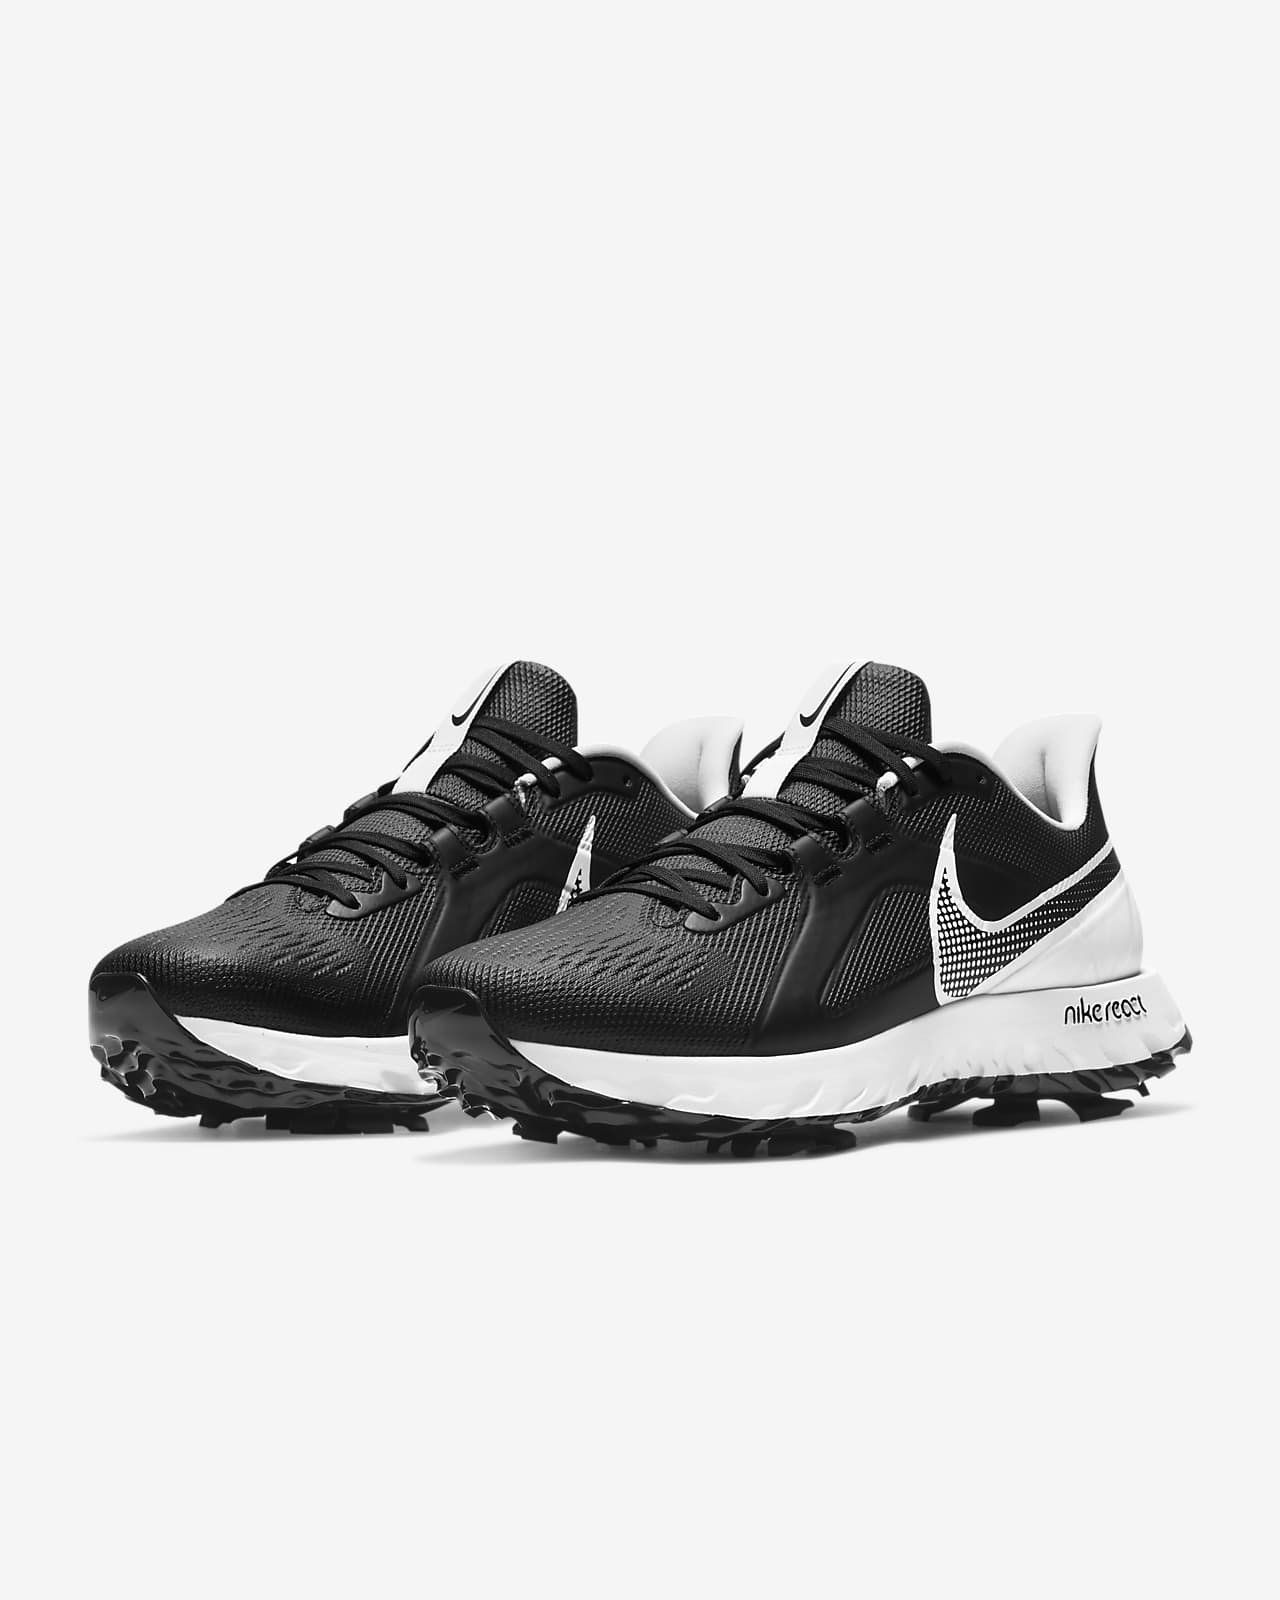 nike react infinity pro golf review